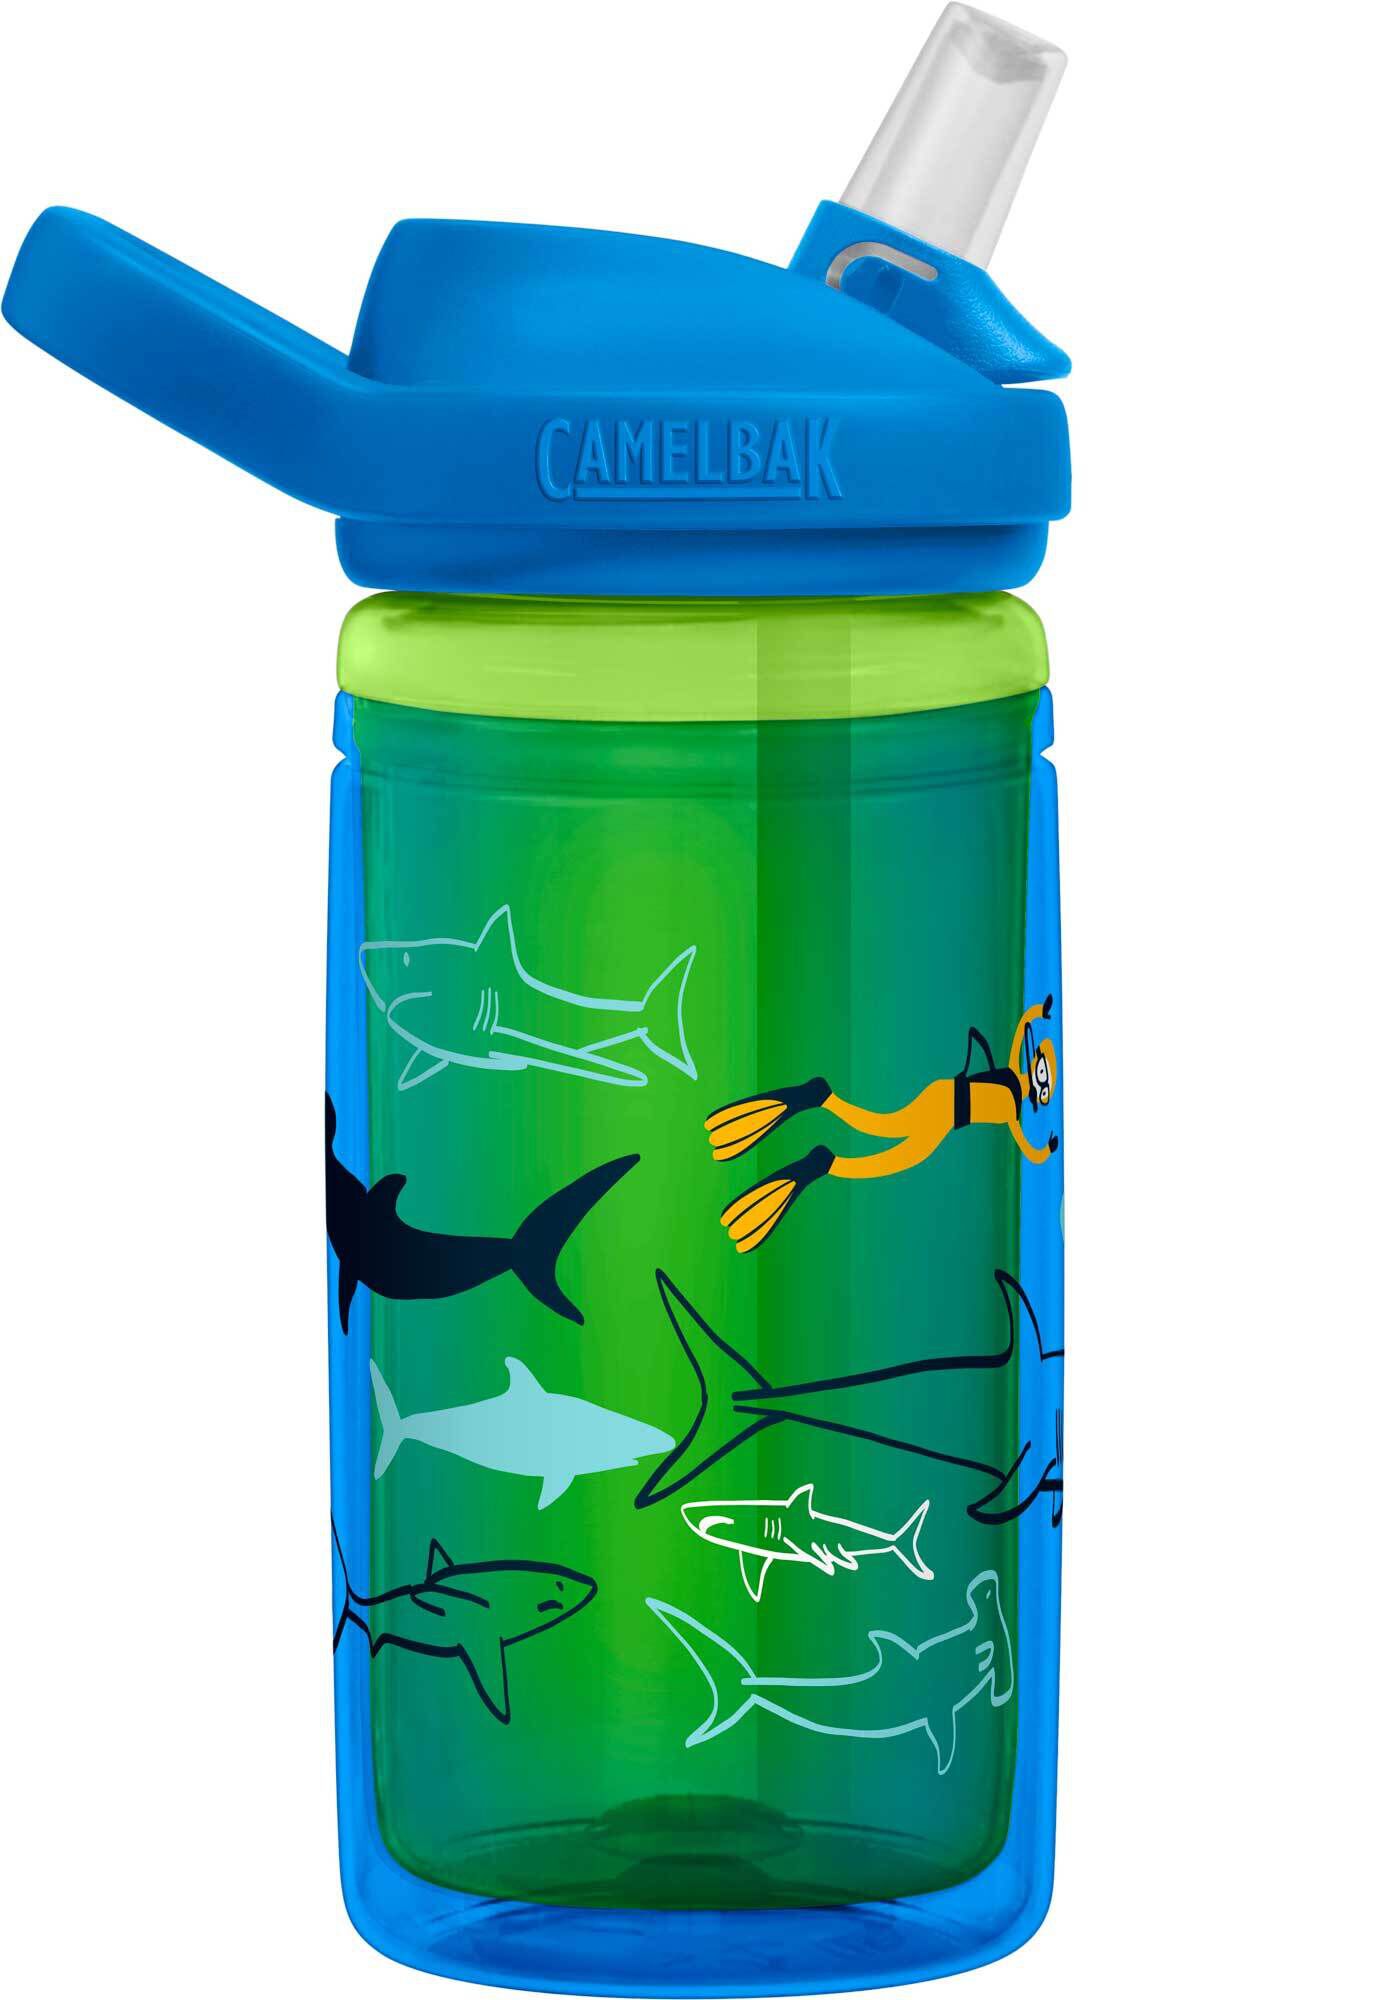 1579103140 CamelBak EDDY KIDS INSULATED Camping Hiking 400ml 12oz Water Bottle 